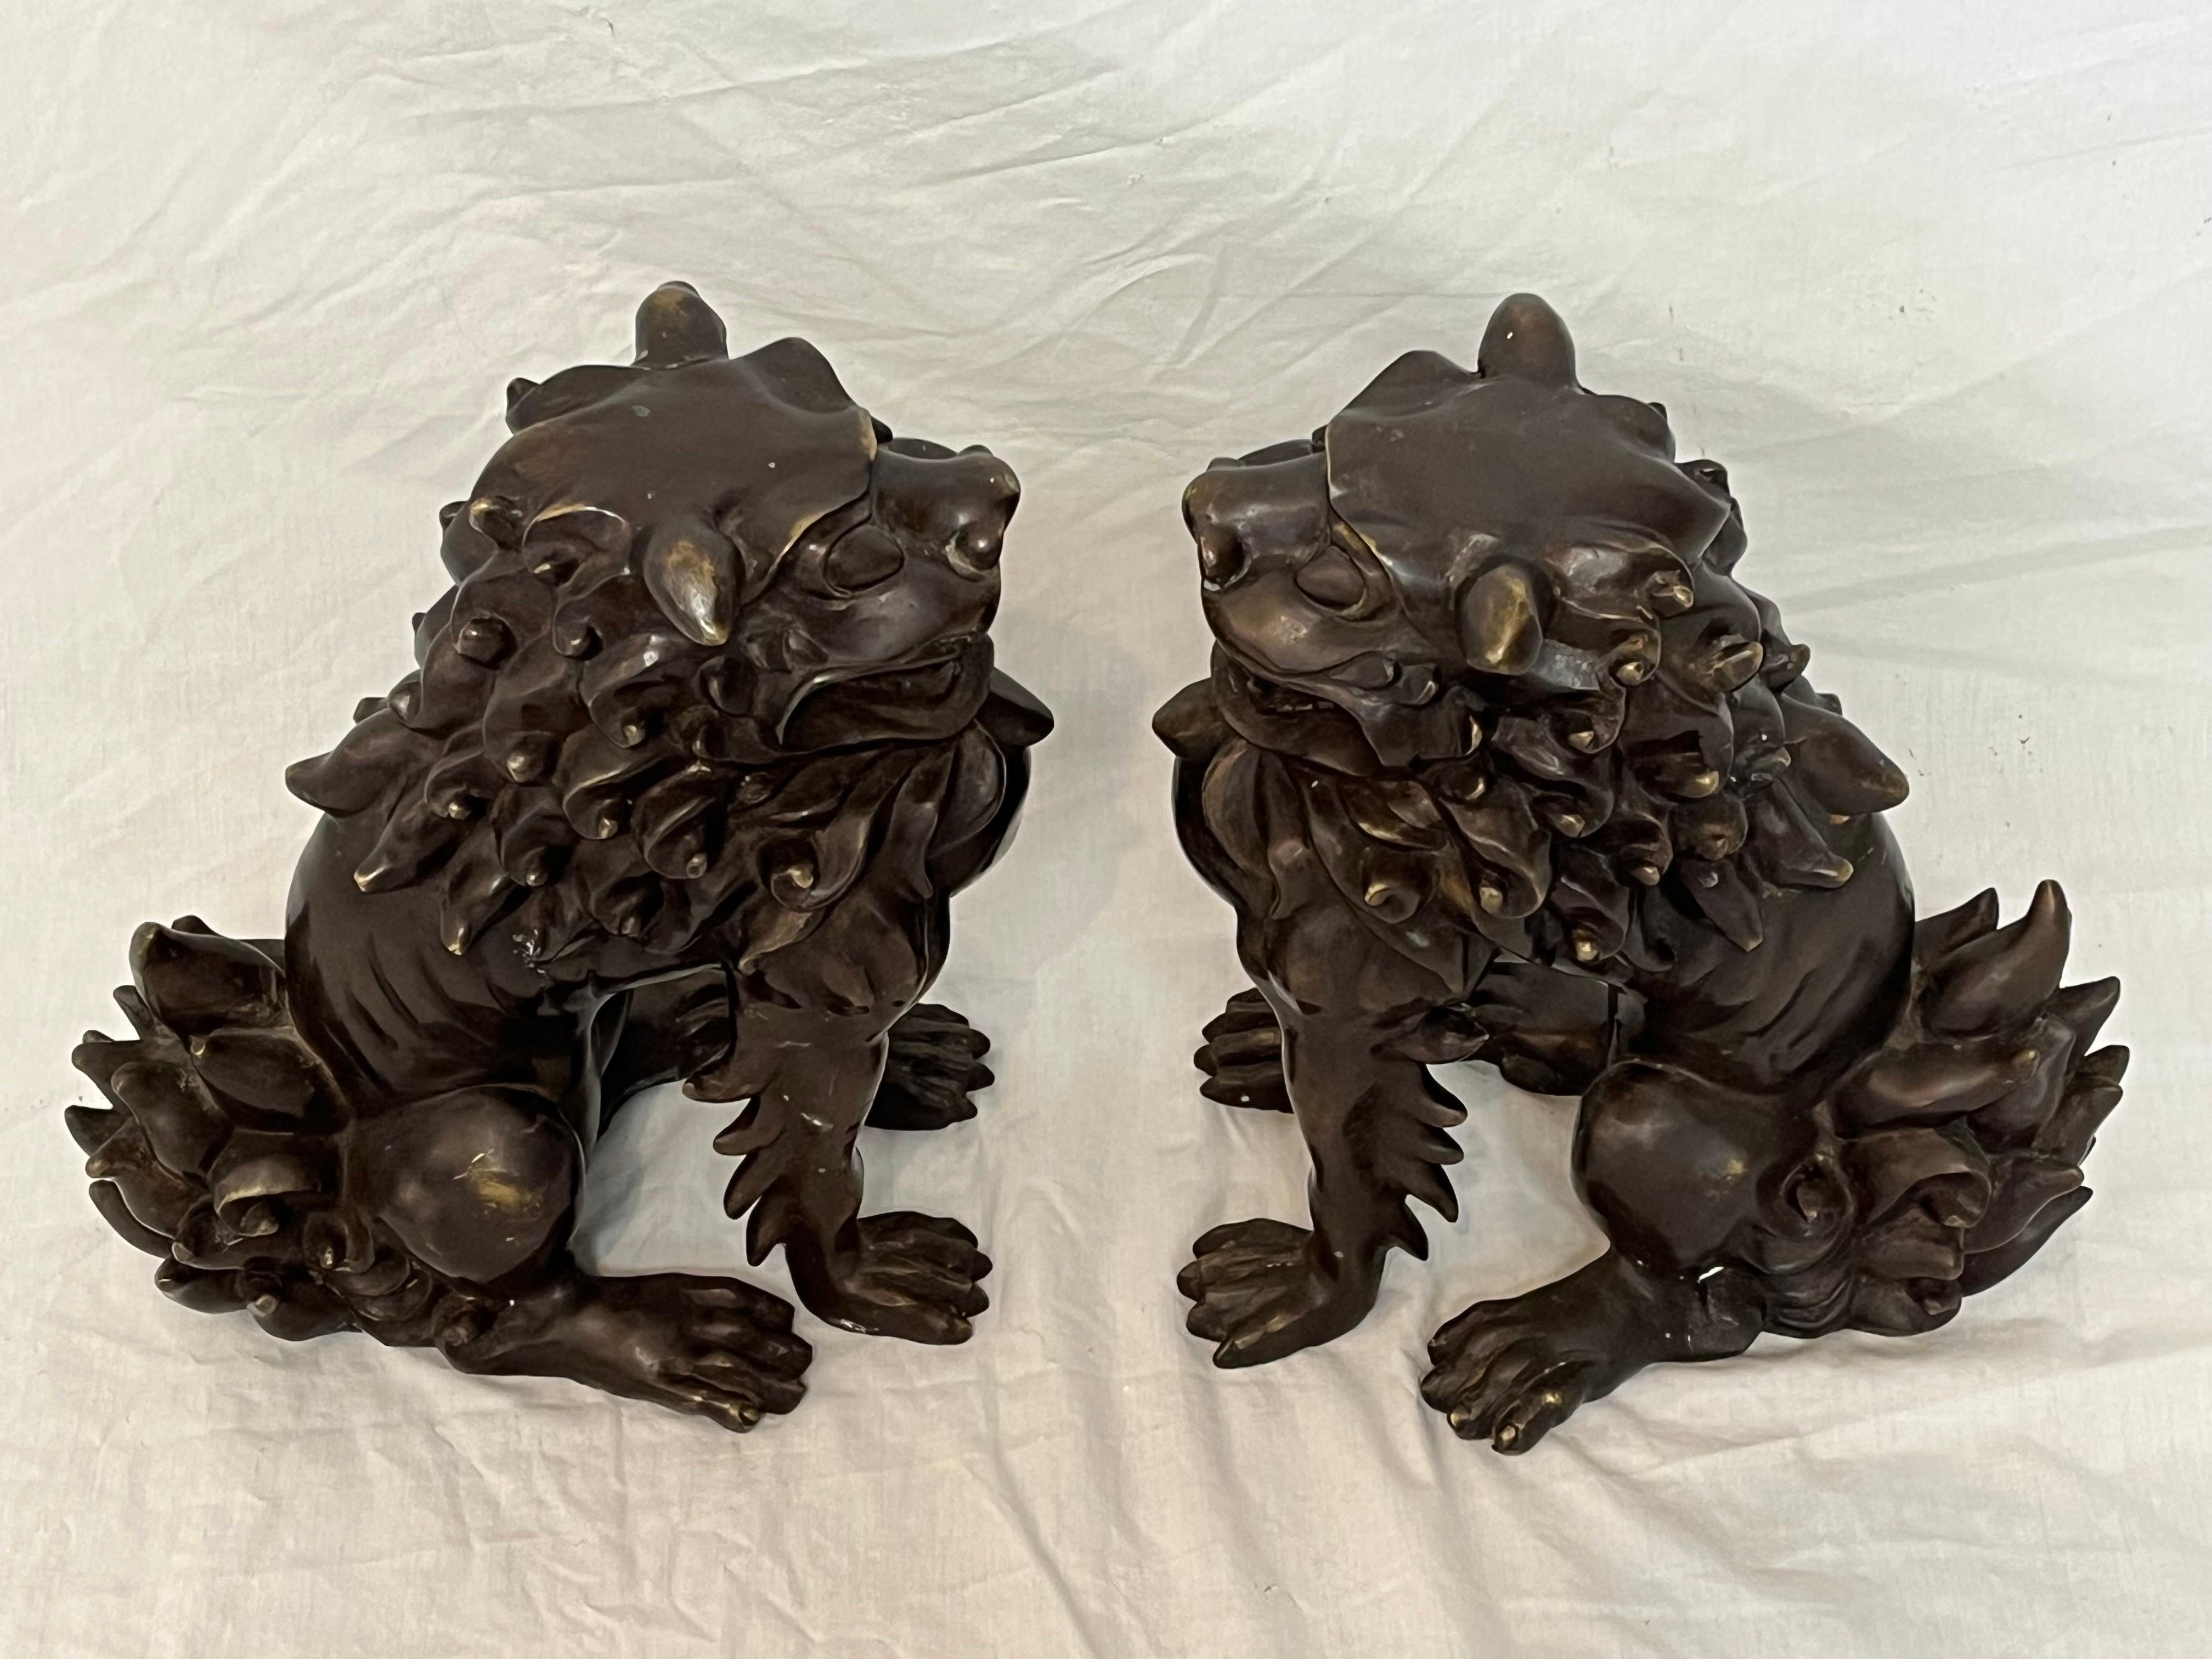 A large and impressive pair of bronze lionized Shih Tzus - also known as Fu (Foo) dogs. The pair each have wonderful detail, great scale and true heaviness and quality. The artistically tufted manes, the lean bodies, the rich and warm patina - these